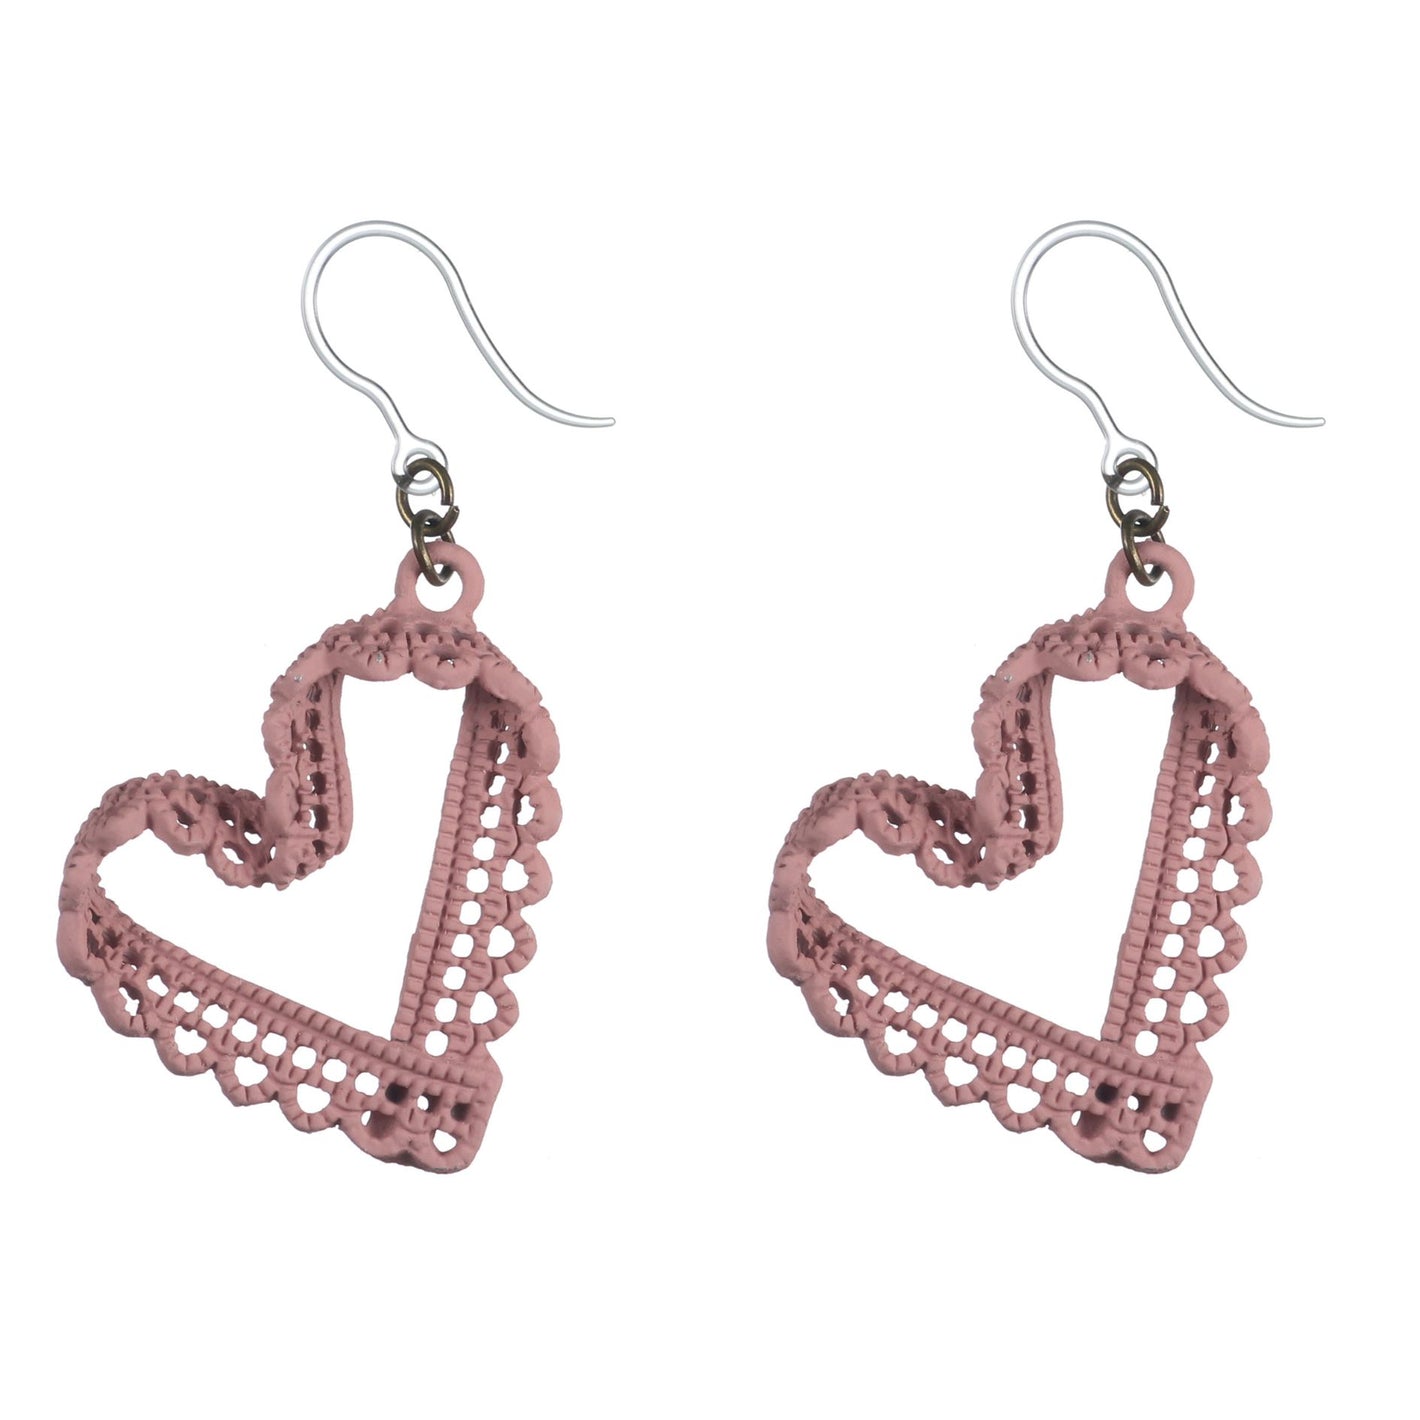 Lace Heart Dangles Hypoallergenic Earrings for Sensitive Ears Made with Plastic Posts